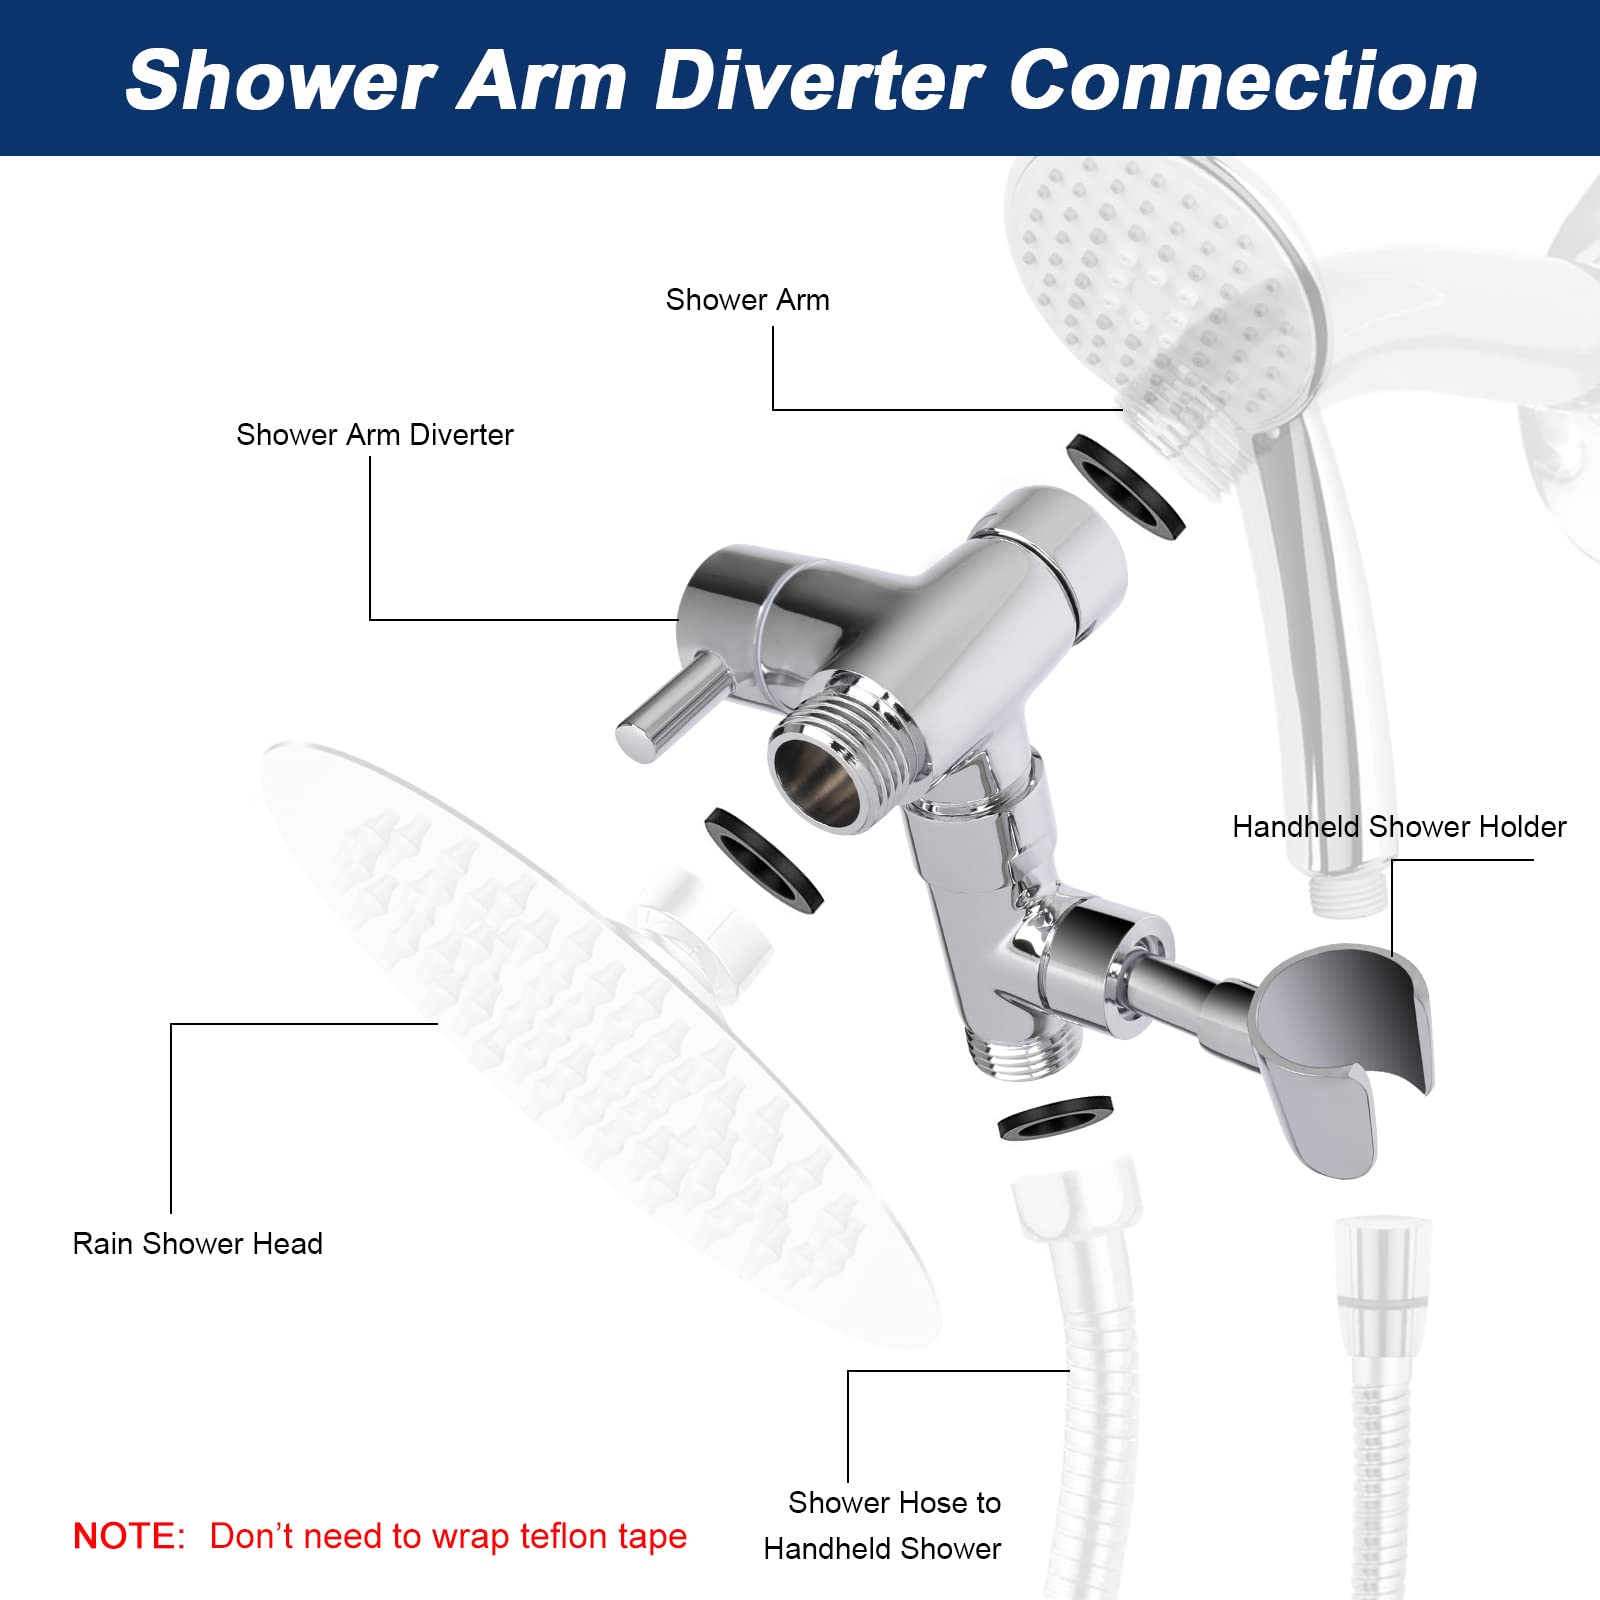 NearMoon All Metal Shower Arm Diverter with Handheld Shower Mount, G1/2 3-Way Diverter Valve Bathroom Universal Shower System Replacement Part for Hand Shower and Fixed Shower Head (Chrome Finish)